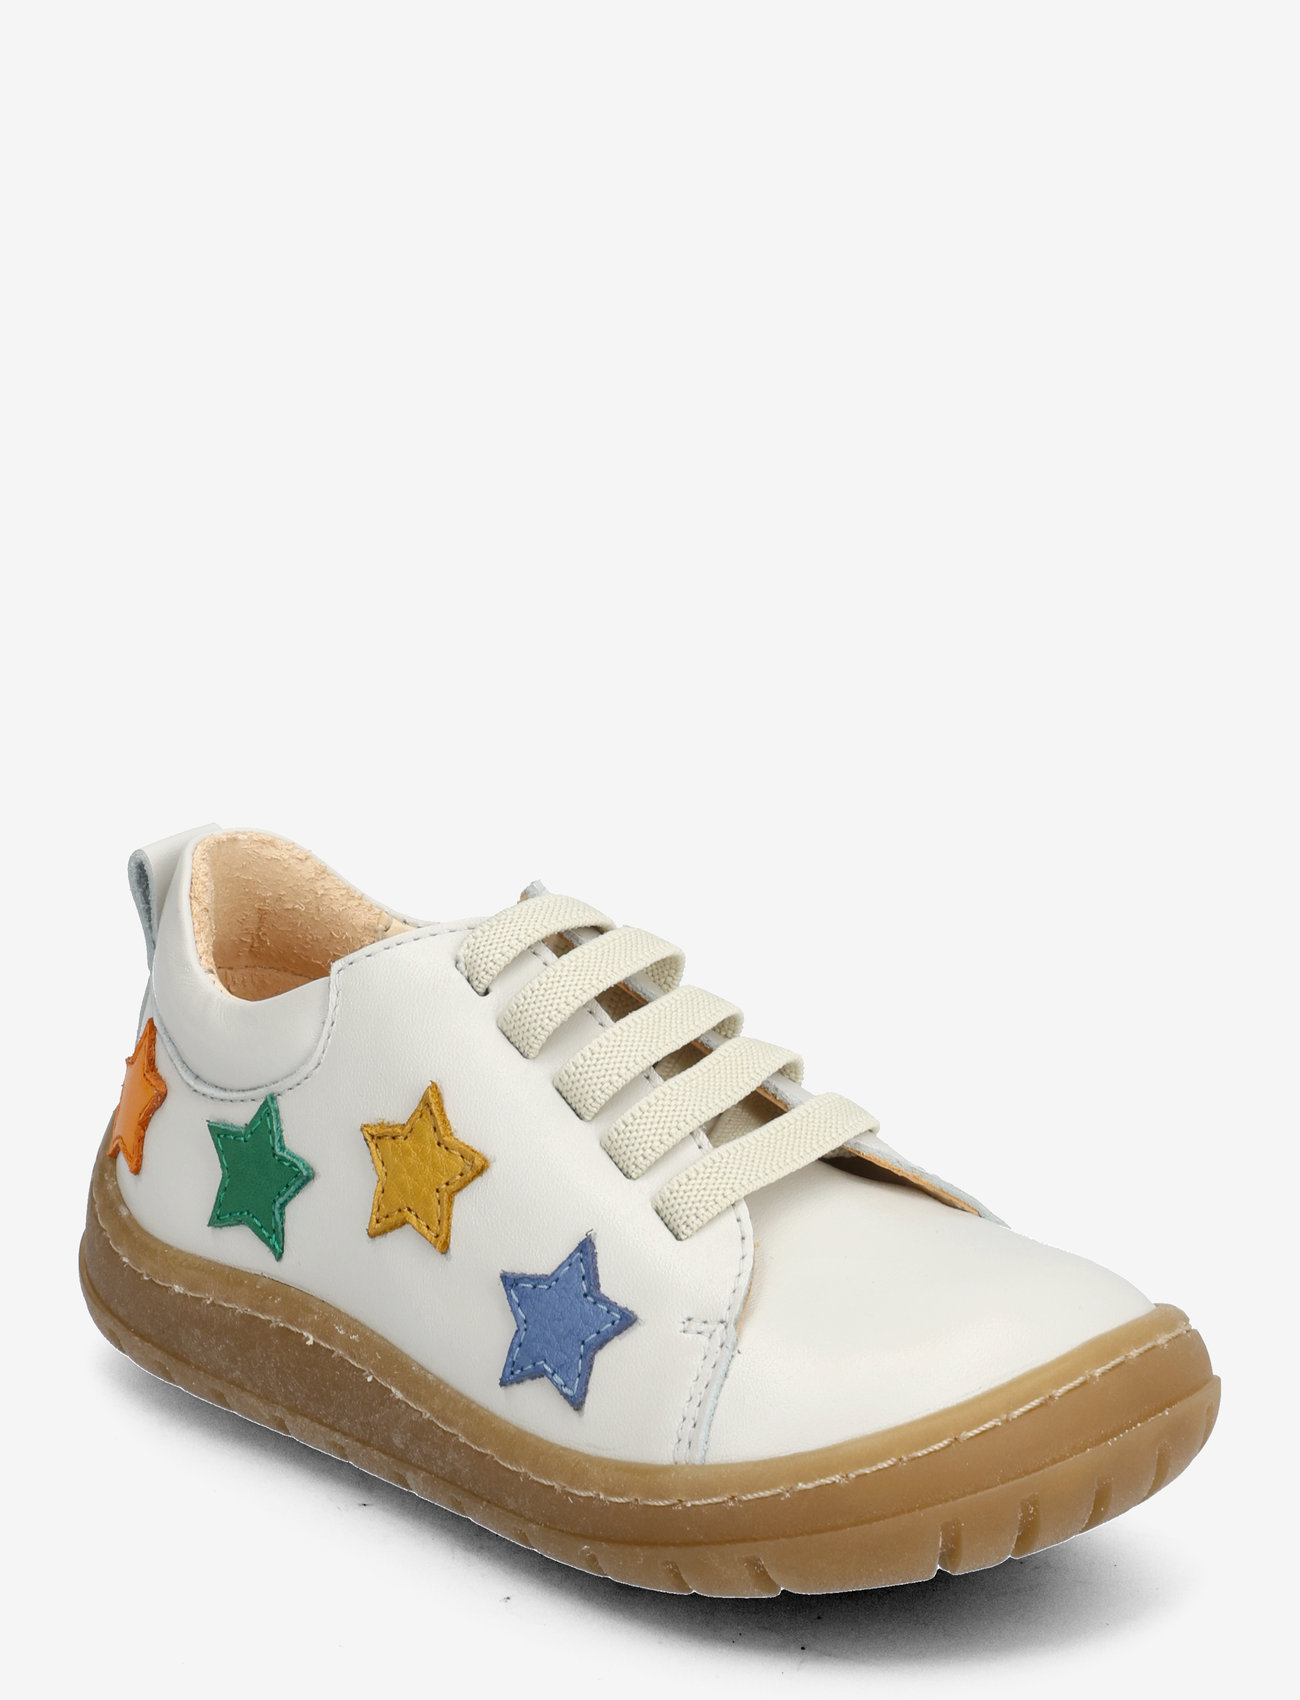 ANGULUS - Shoes - flat - with lace - summer savings - 1493/a006 off white/stars - 0